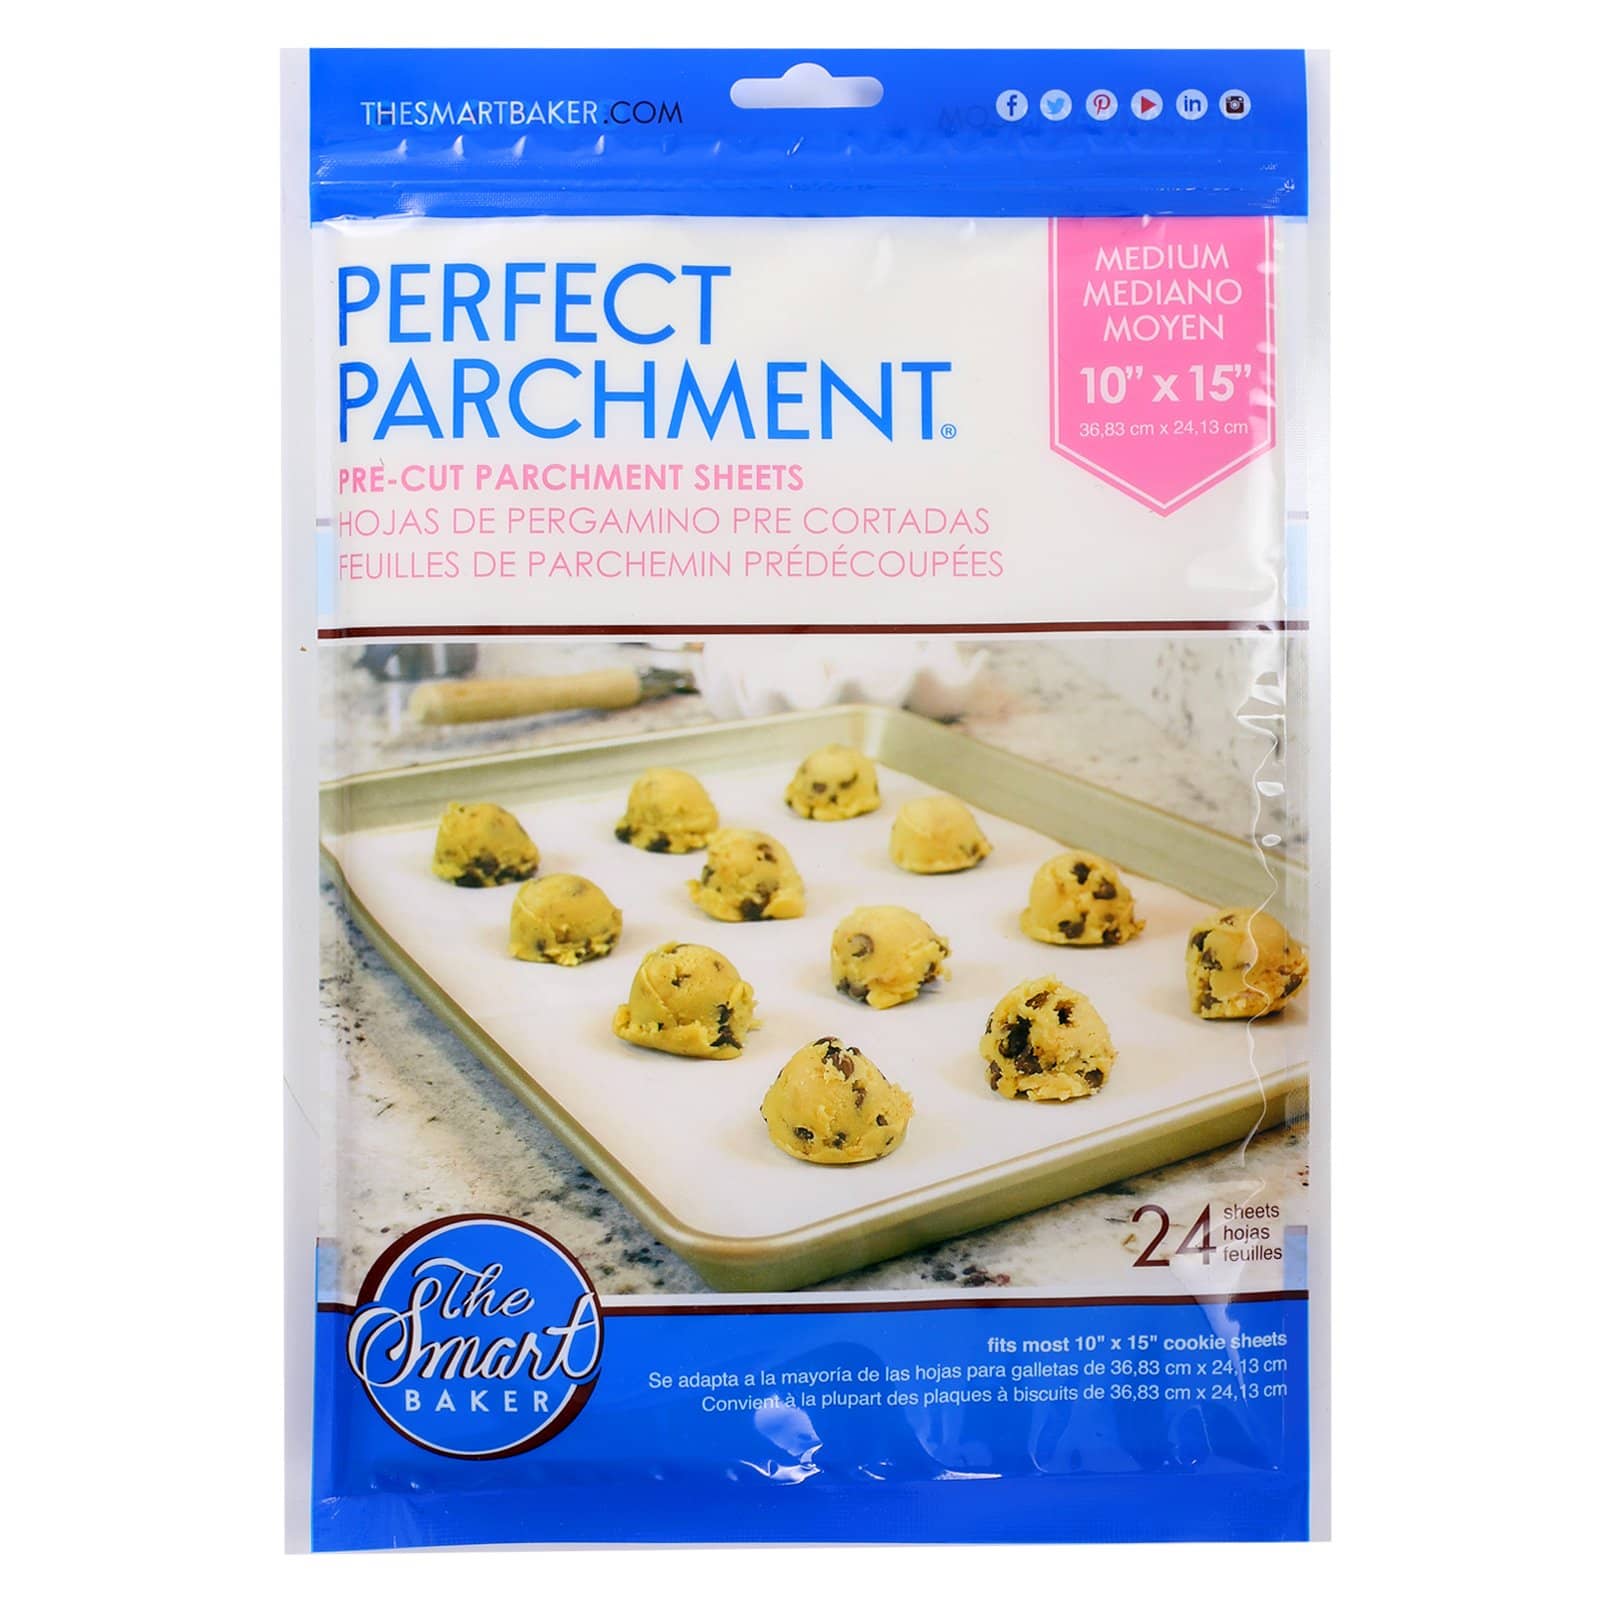 Parchment Paper Sheets for Baking: Oven Safe Parchment Paper, Parchment  Sheets, Bakery Quality Baking Paper for Perfect Result, Greaseproof  Nonstick